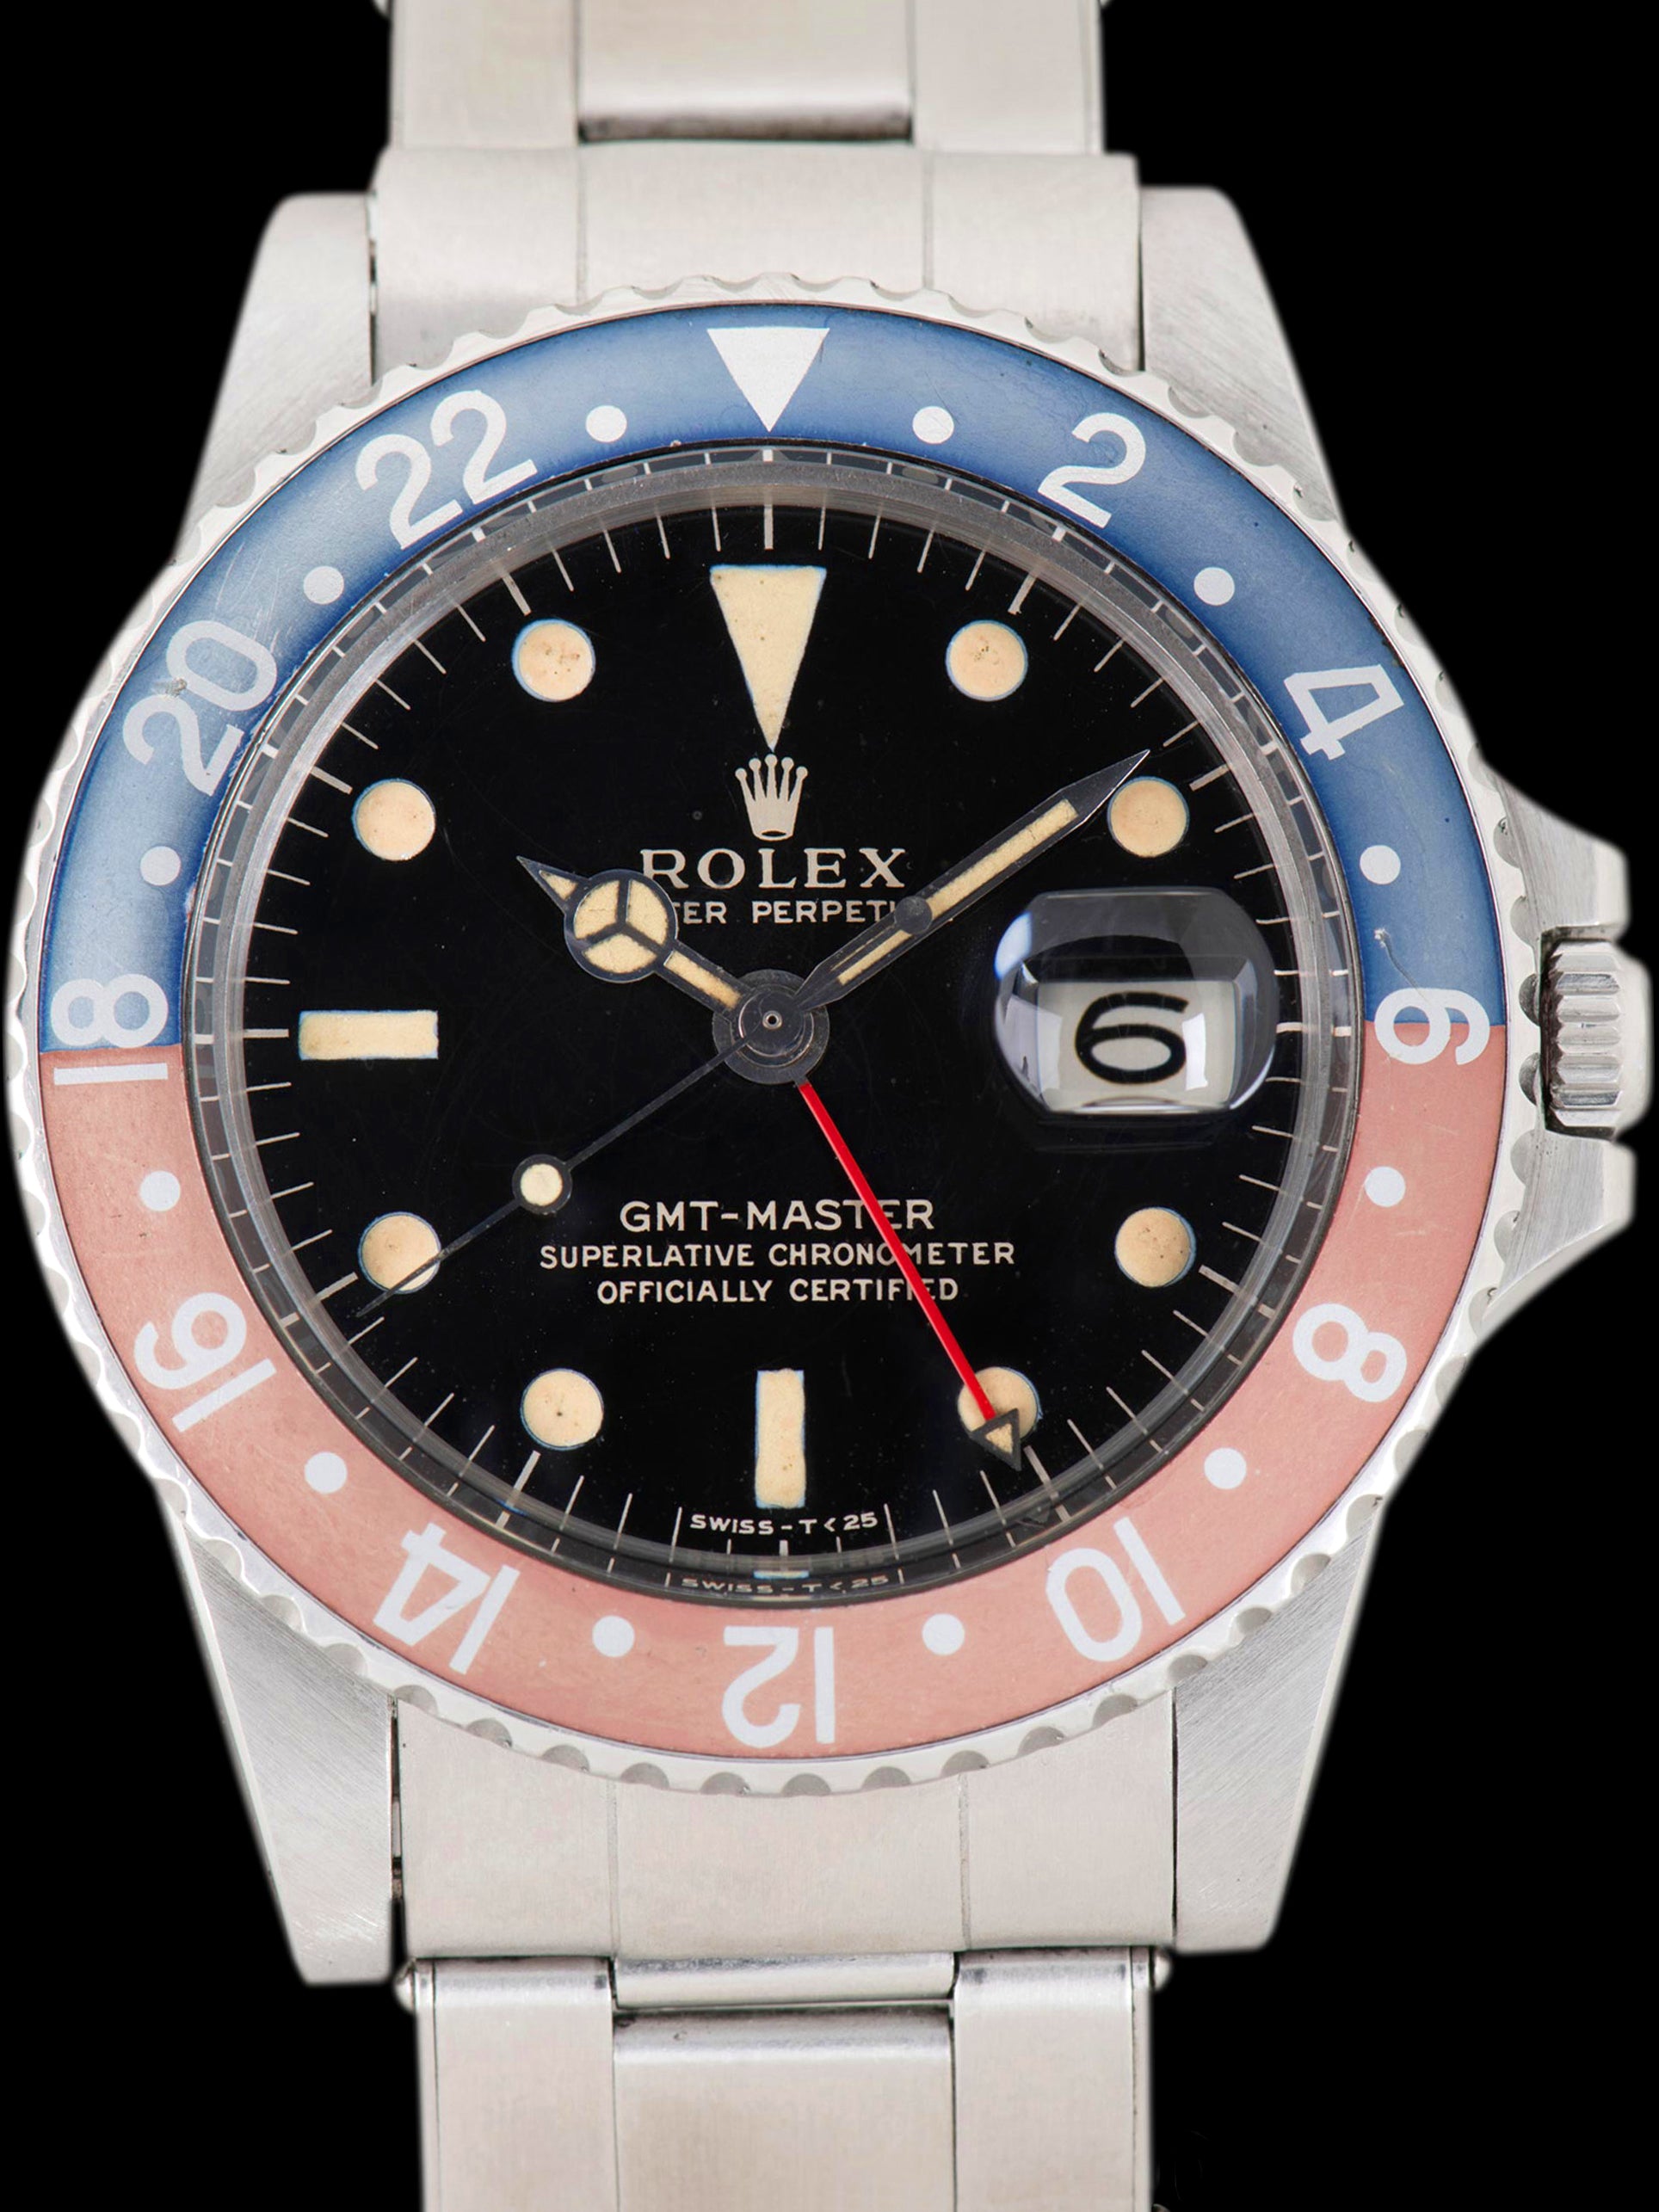 1966 Rolex GMT-Master (Ref. 1675) Gilt Dial W/ Box, Double Punched Papers, & Hangtags